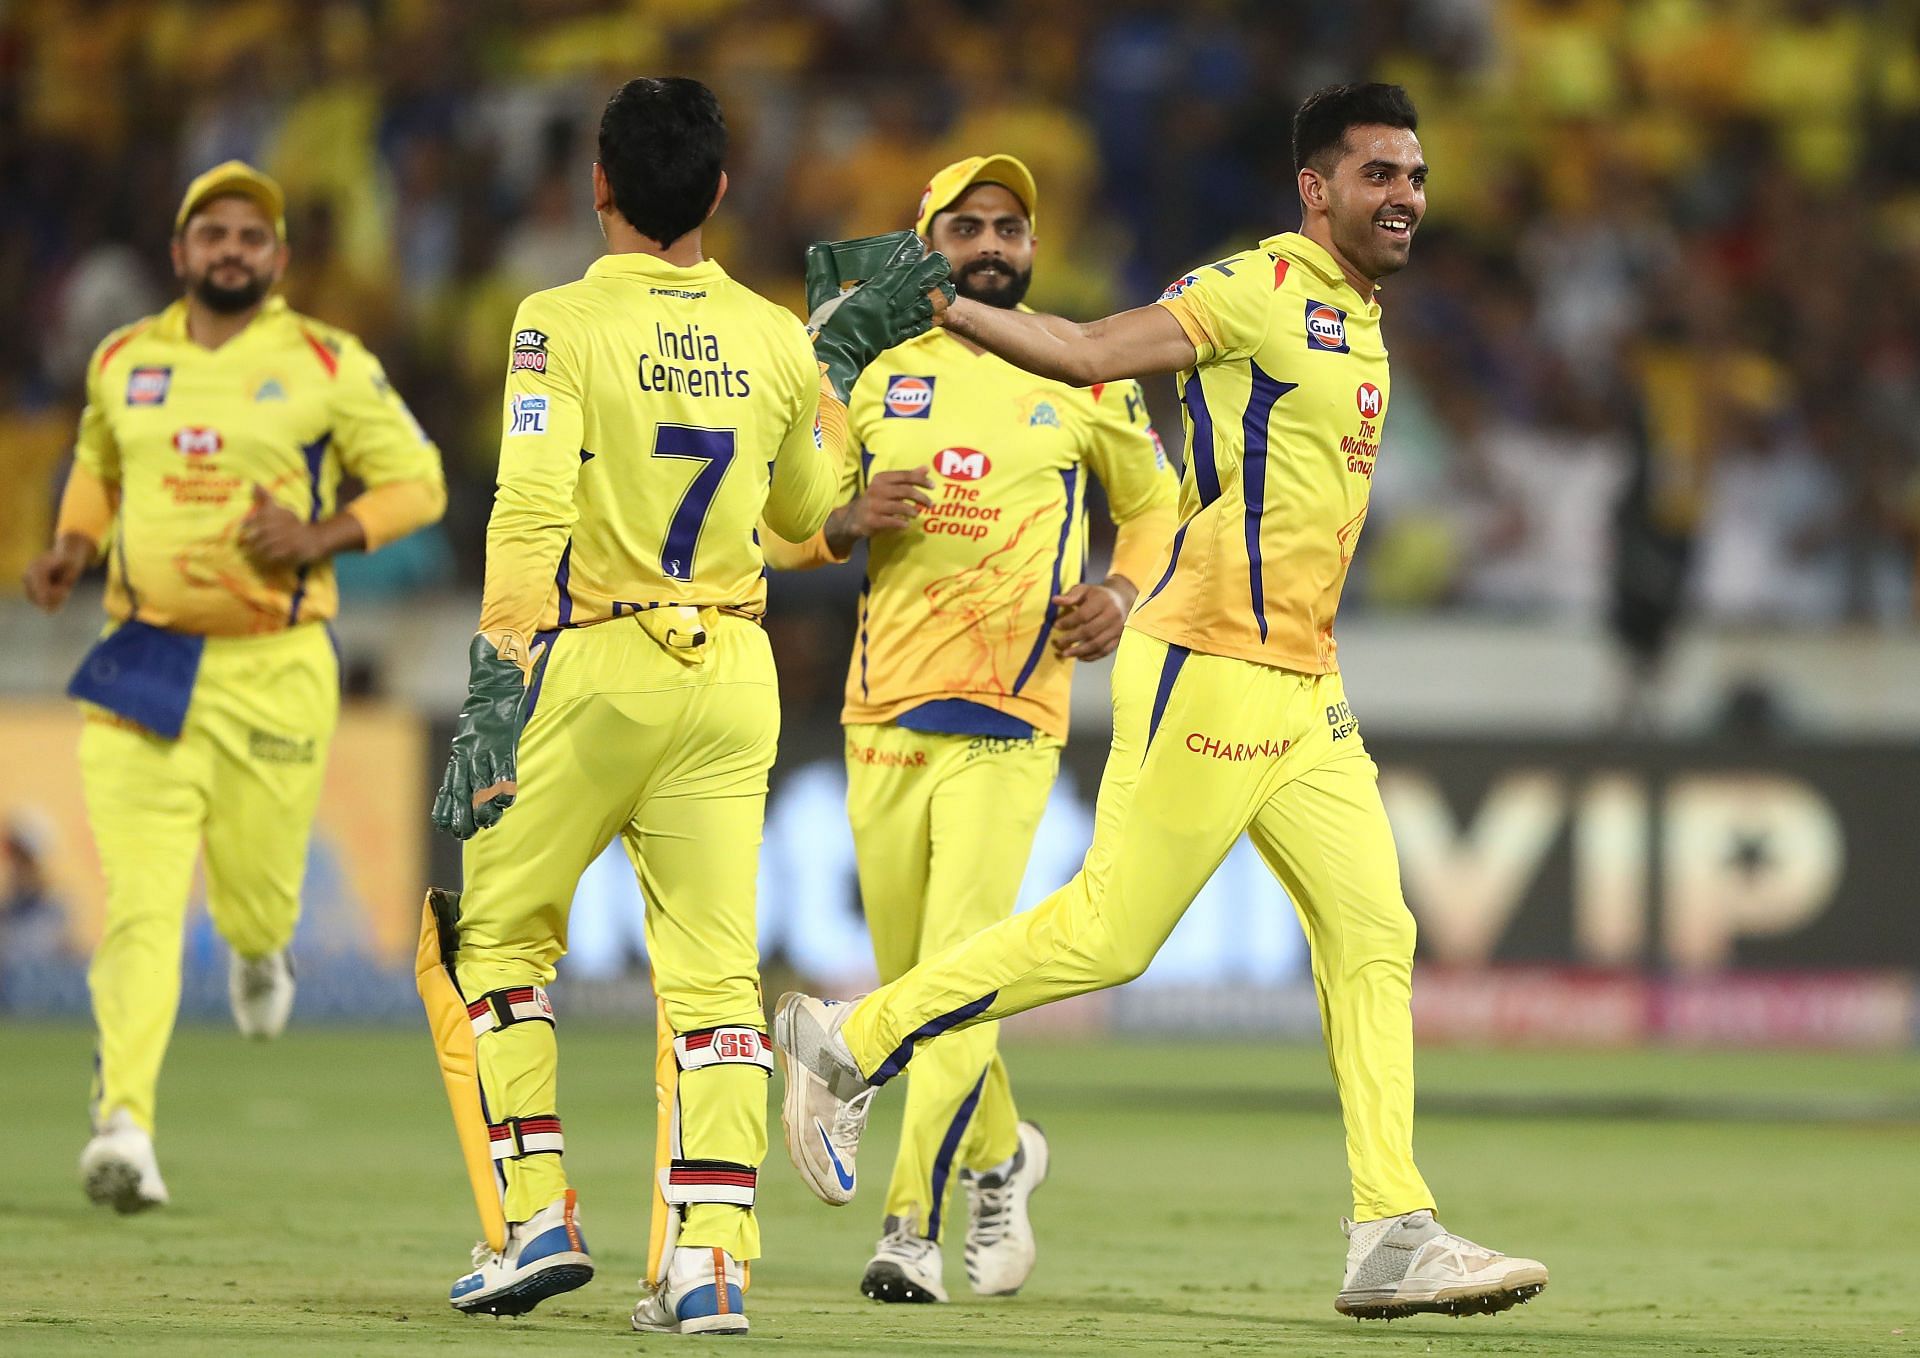 CSK could look to target Root at the auction